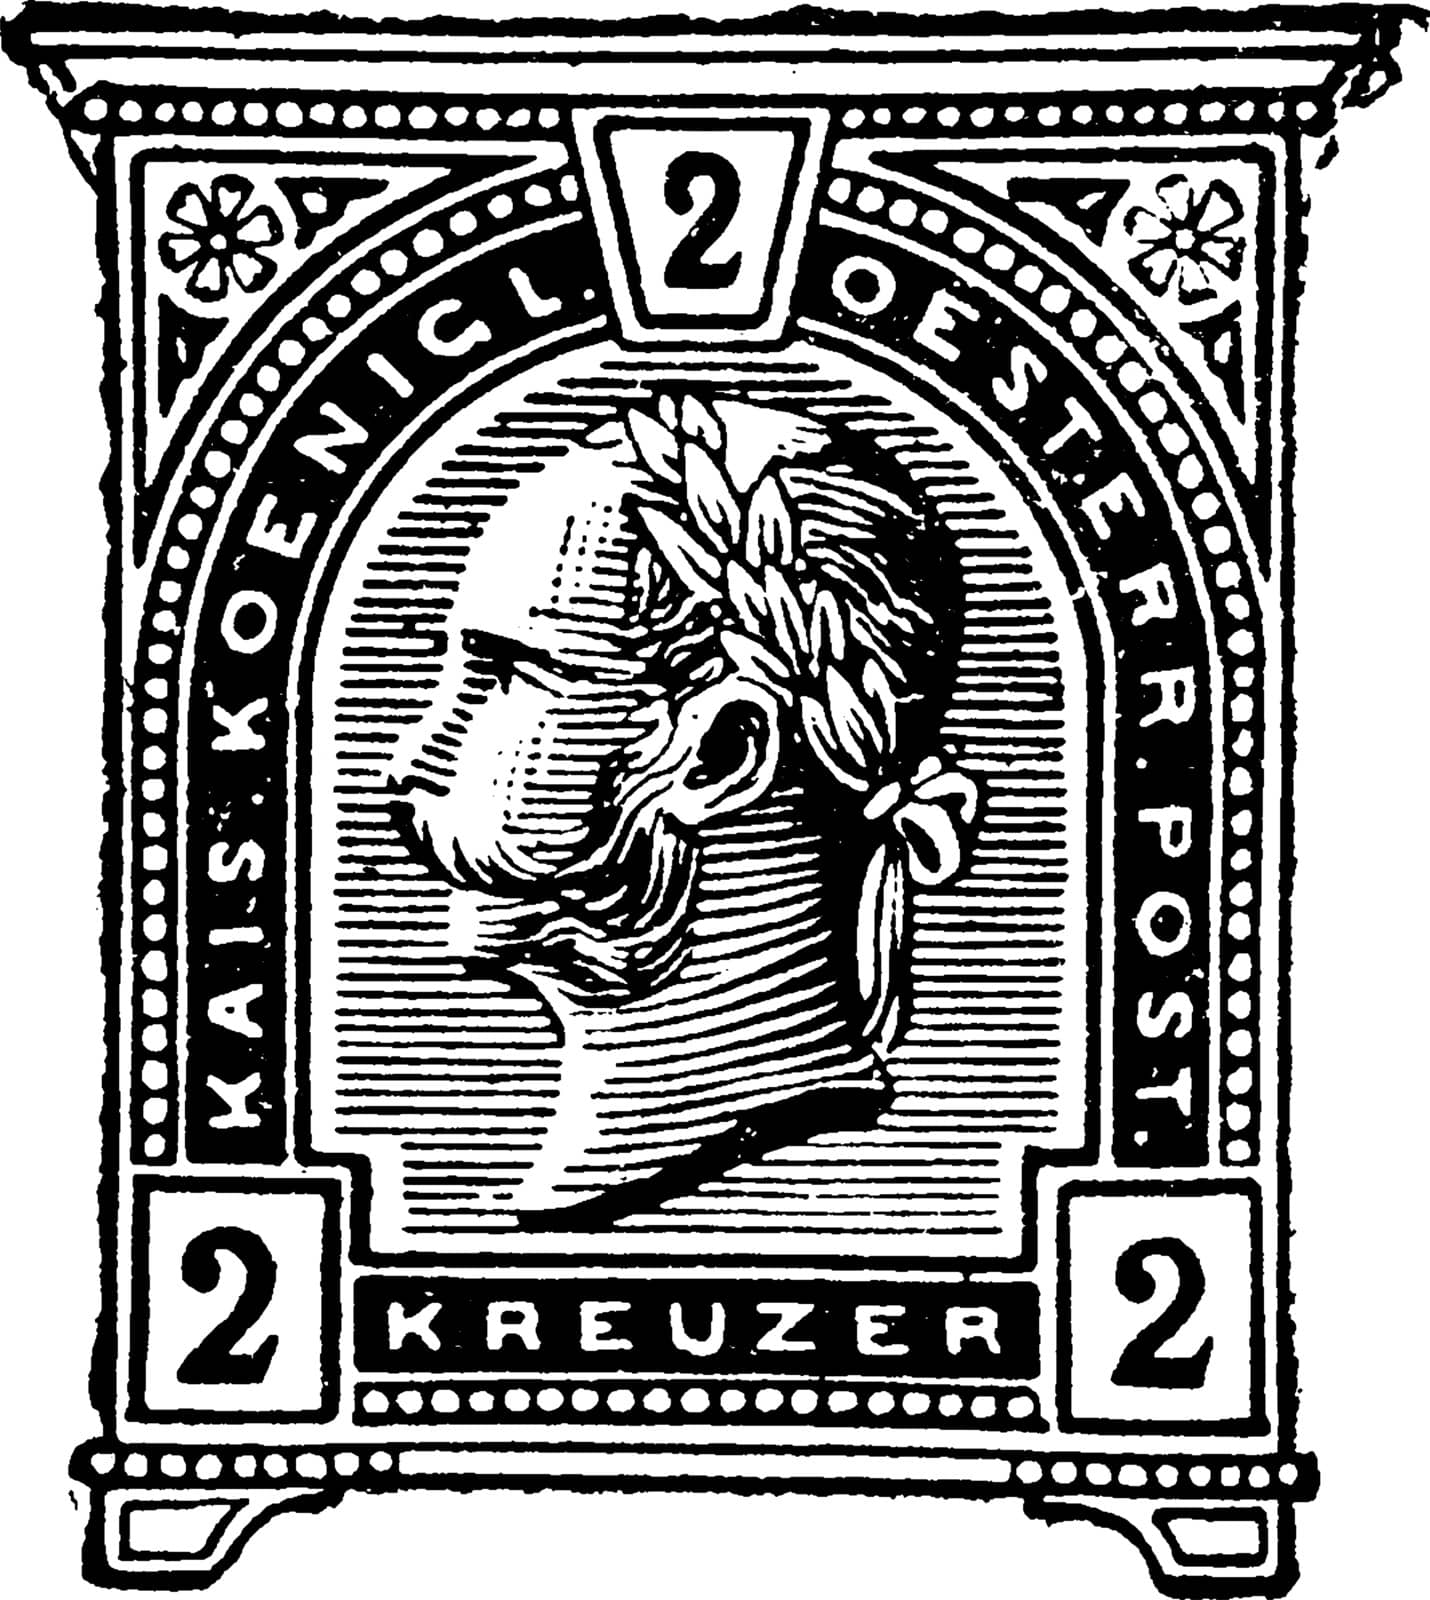 Austria 2 Kreuzer Wrapper in 1890 which were printed by the Austrian Bureau of Engraving, vintage line drawing or engraving illustration.